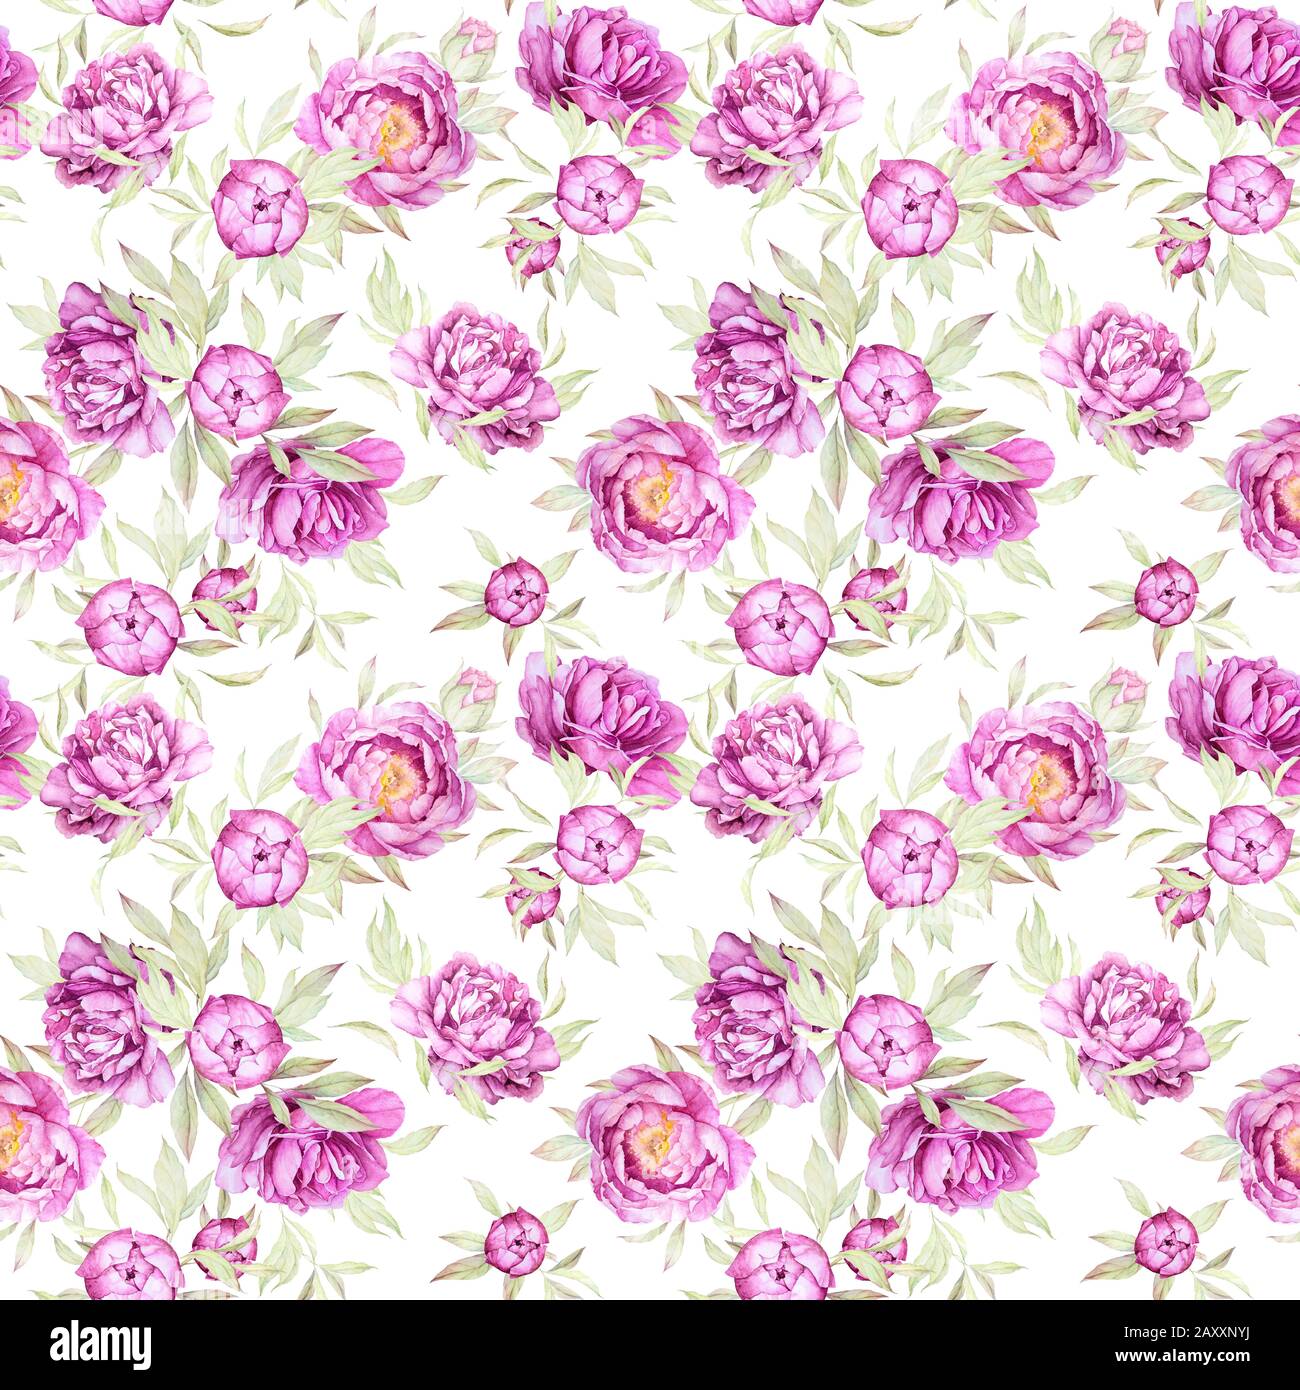 Seamless Floral Pattern. Luxury Pink Flowers. Lush Leaves. Watercolor Vintage Peonies. Wall Art. Light background. Stock Photo